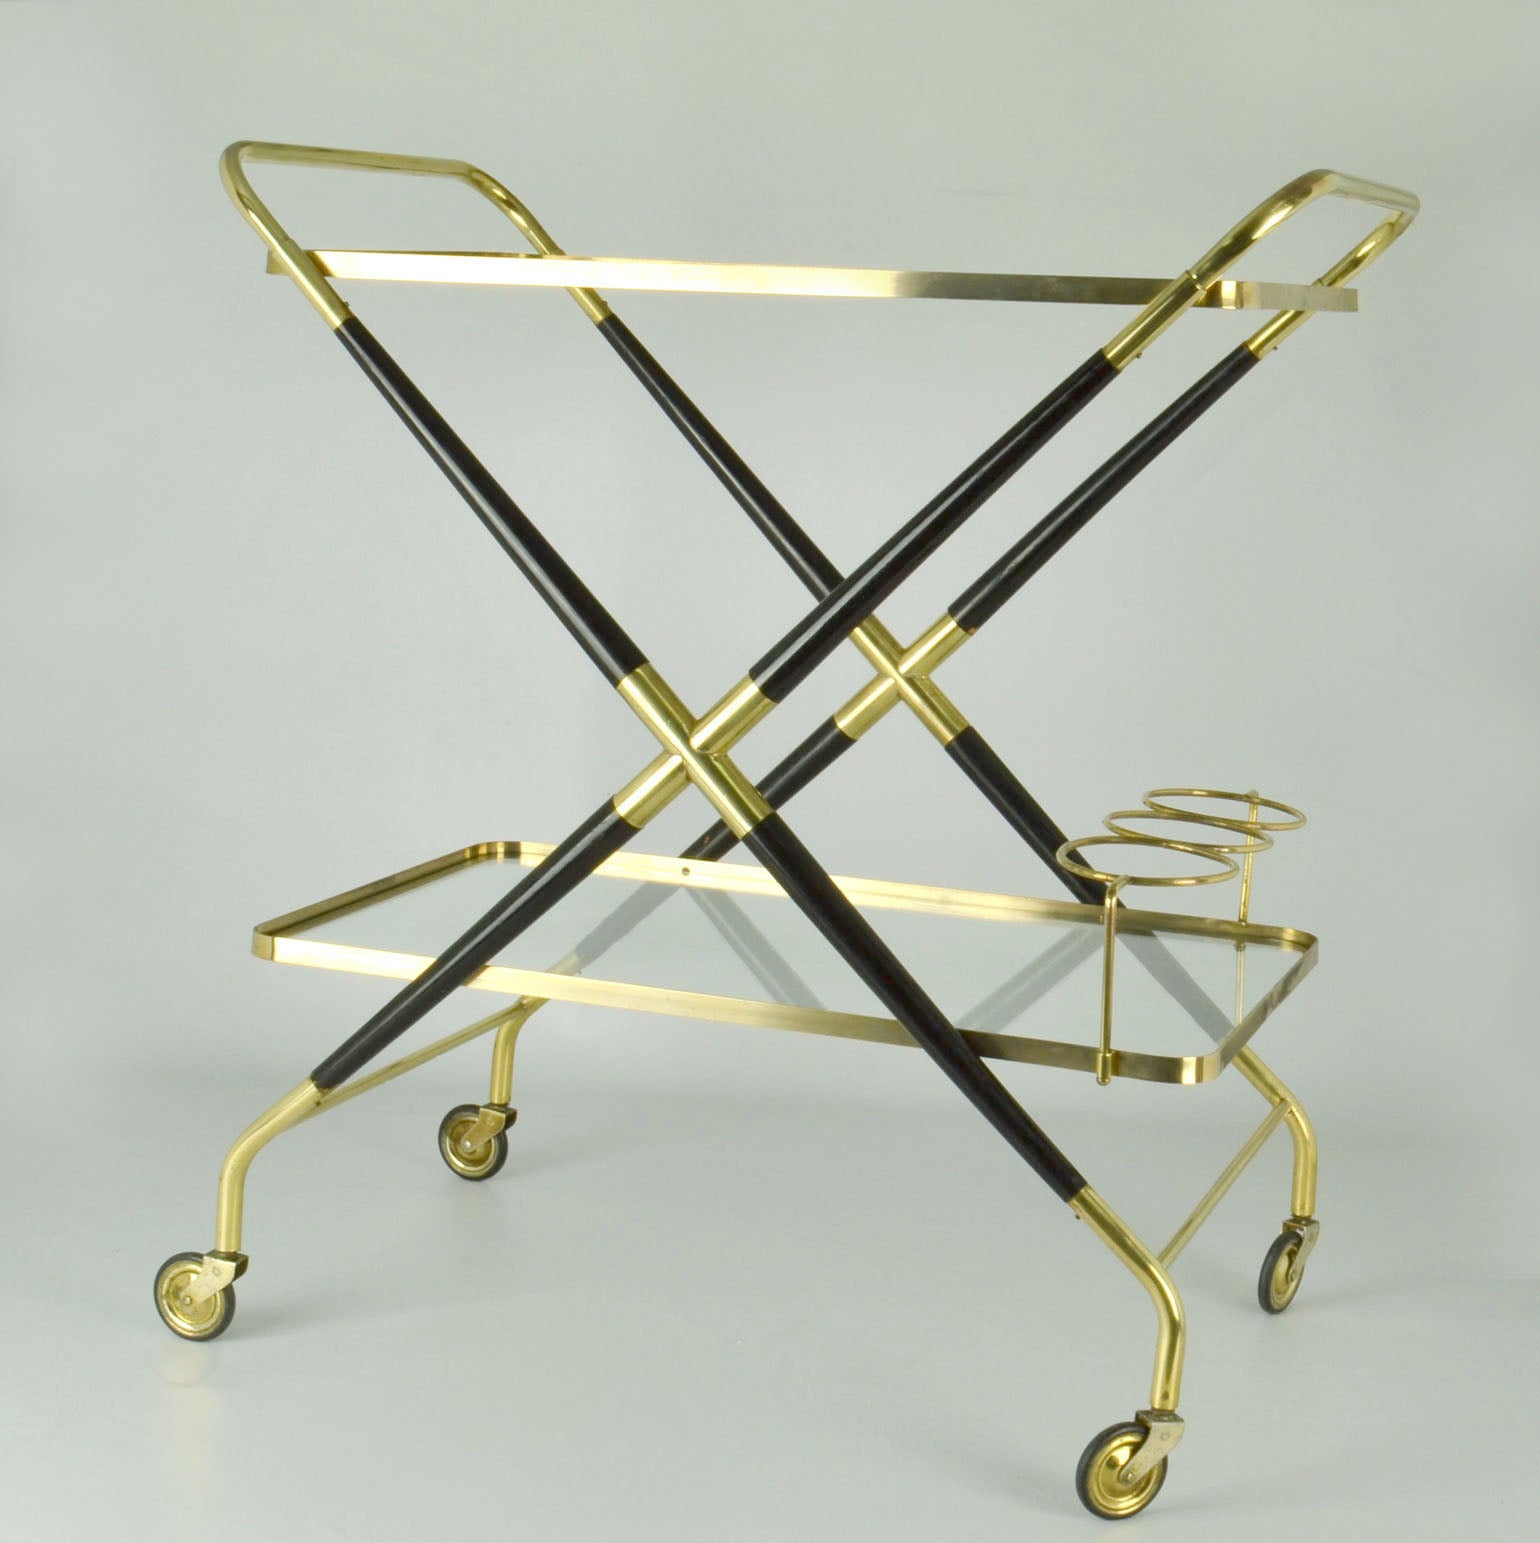 Stylish modernist bar cart or cocktail trolley by Cesare Lacca, Italy 1950's in brass and ebonized lacquered ash. Striking profile and sculptural look, featuring a lower level bottle rest and two levels of removable glass.